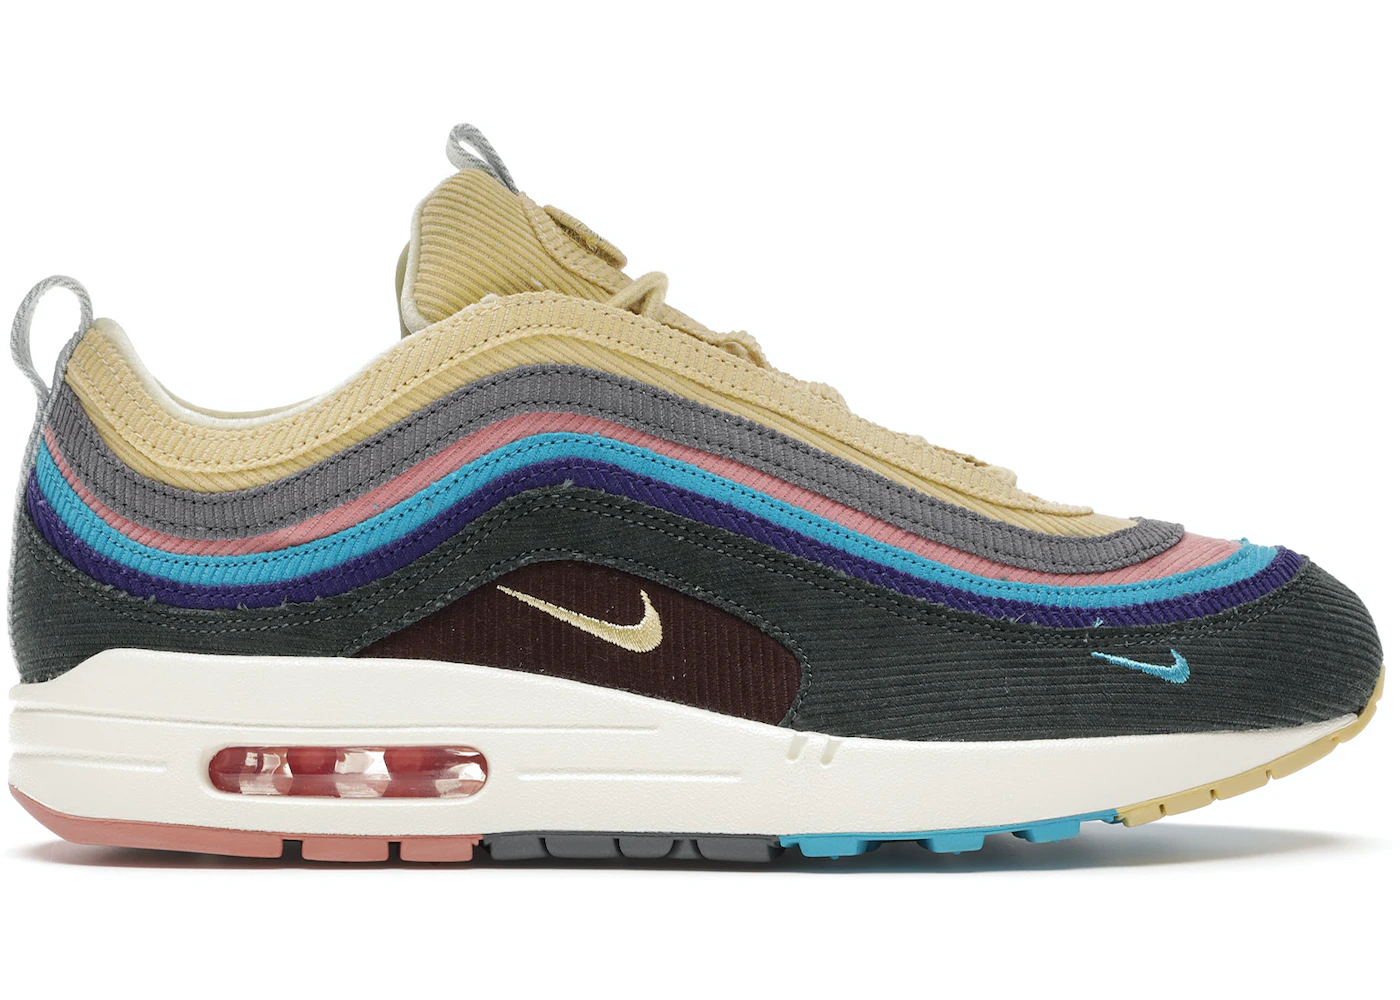 Air Max 1/97 Wotherspoon (All Dustbag) Men's - AJ4219-400 - US